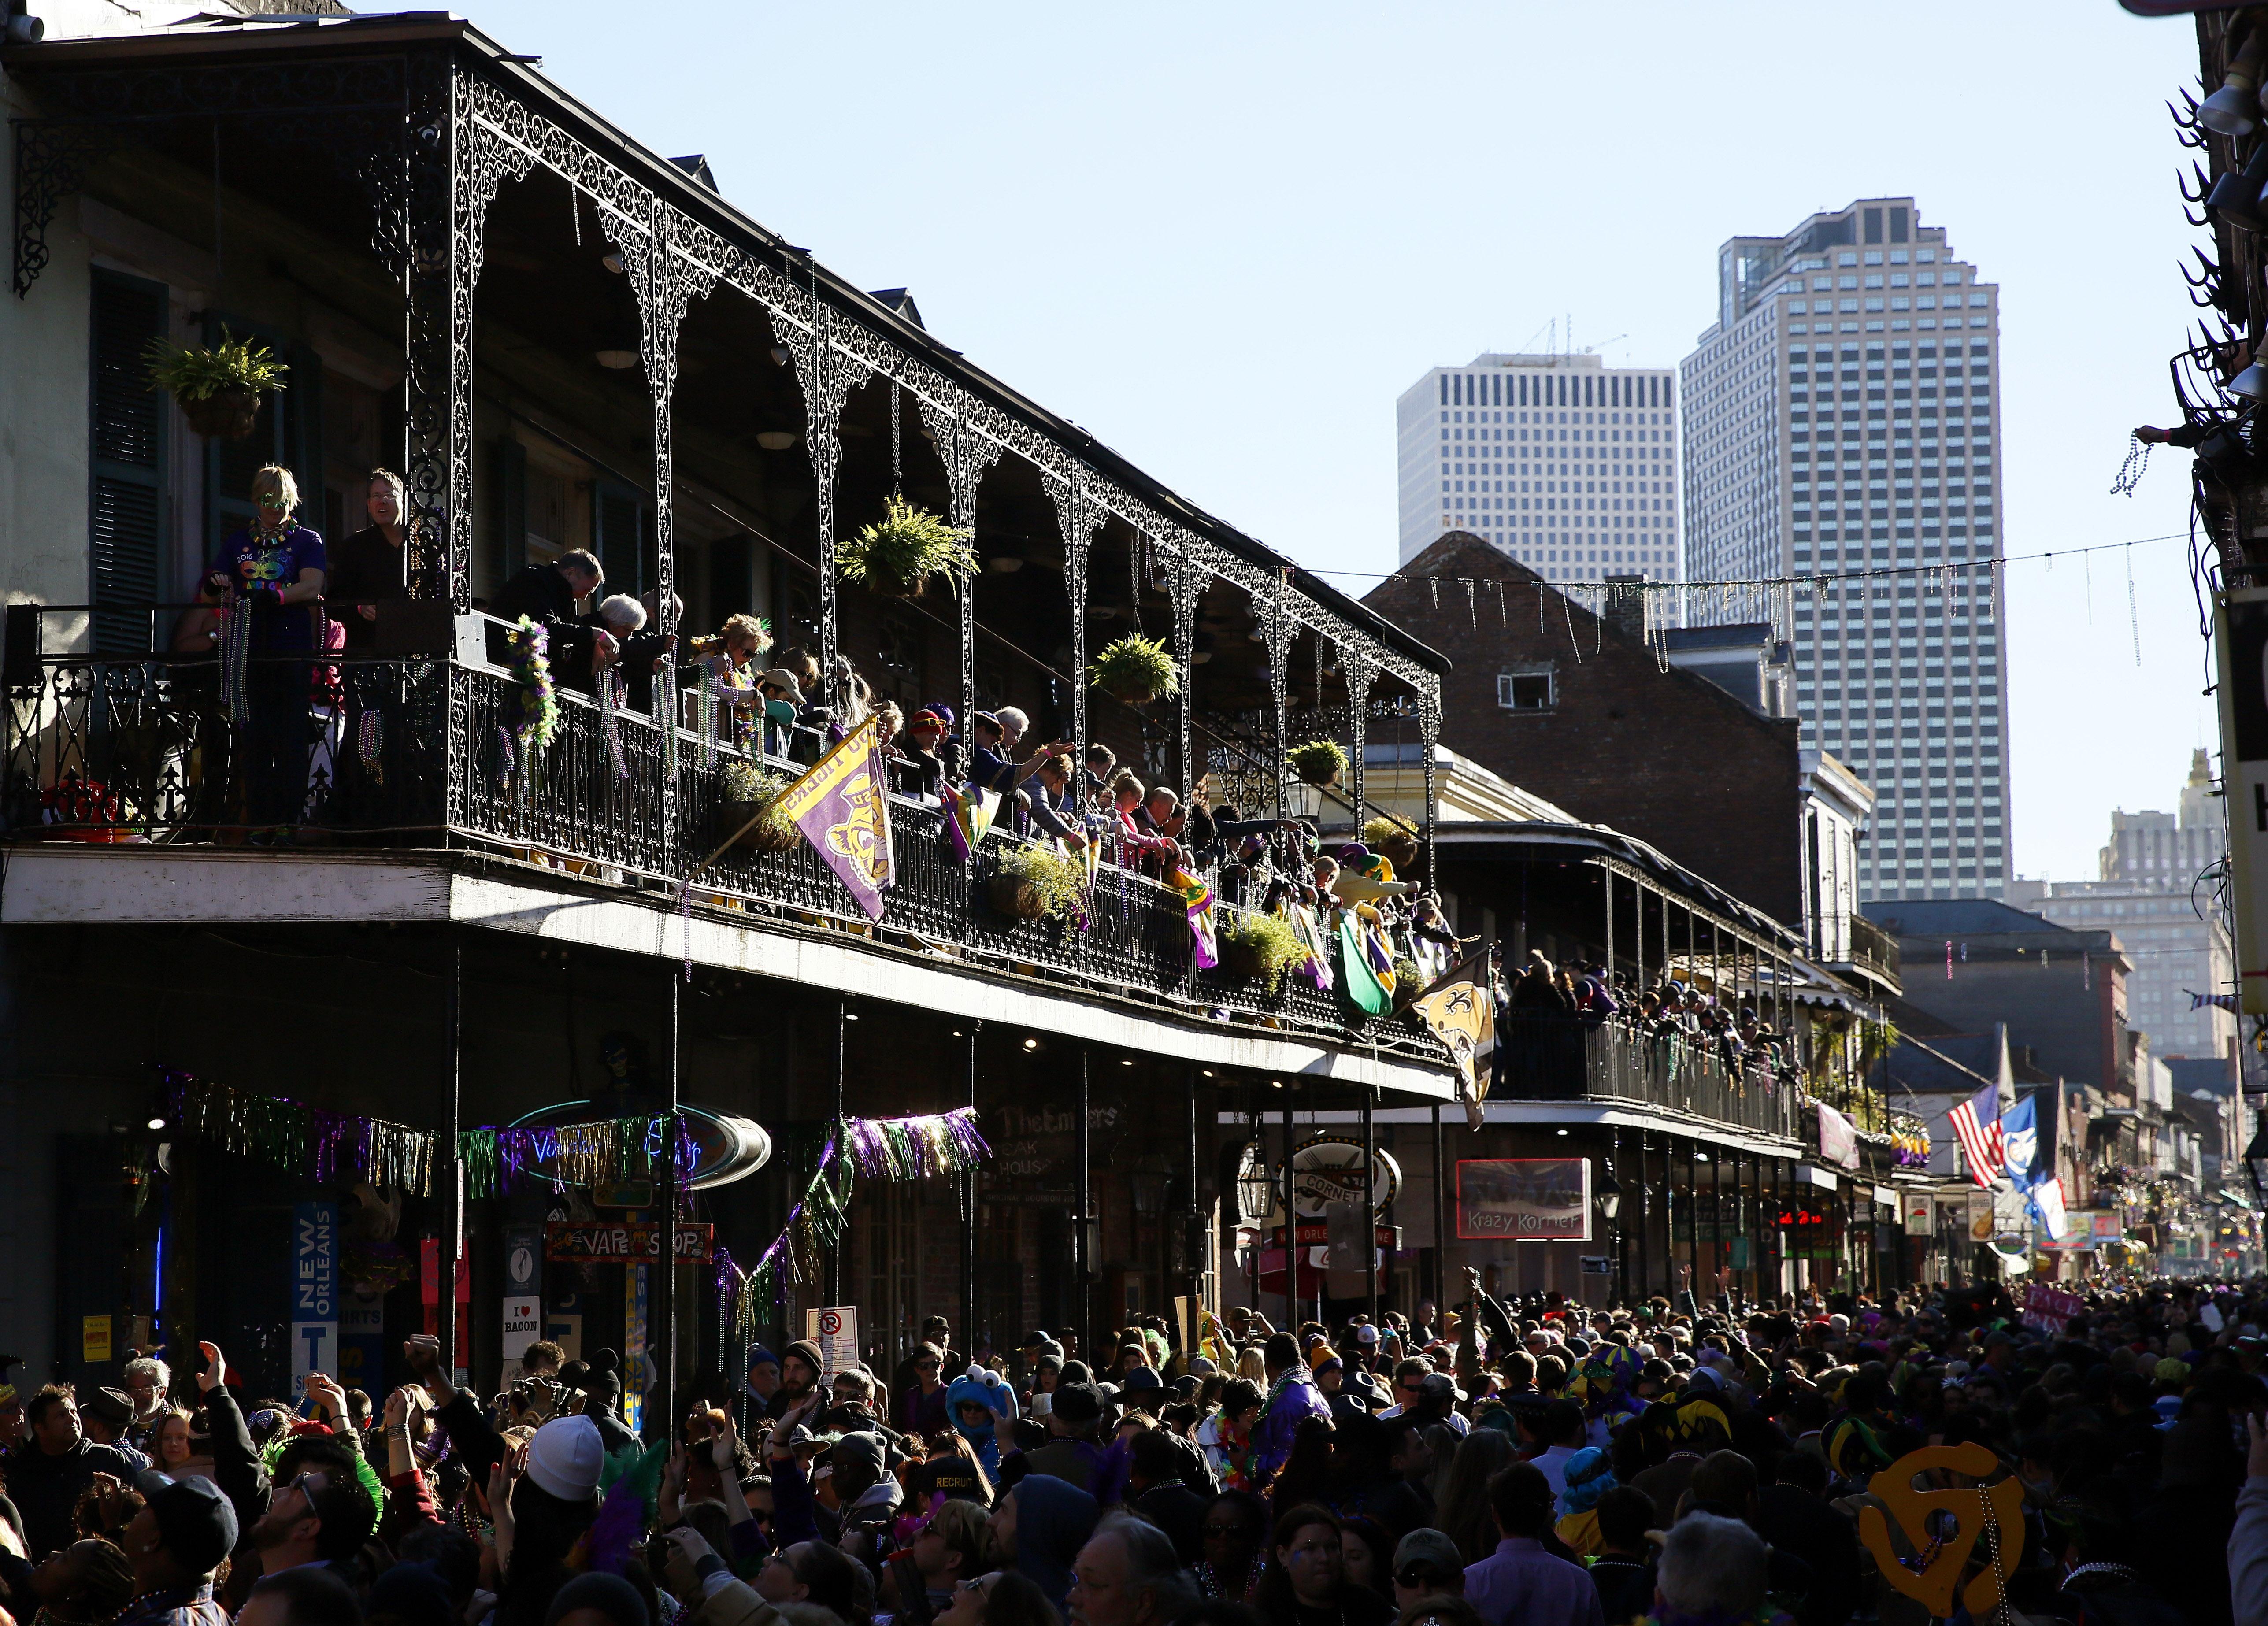 Mardi Gras 2017: How New Orleans Became the Center of It All